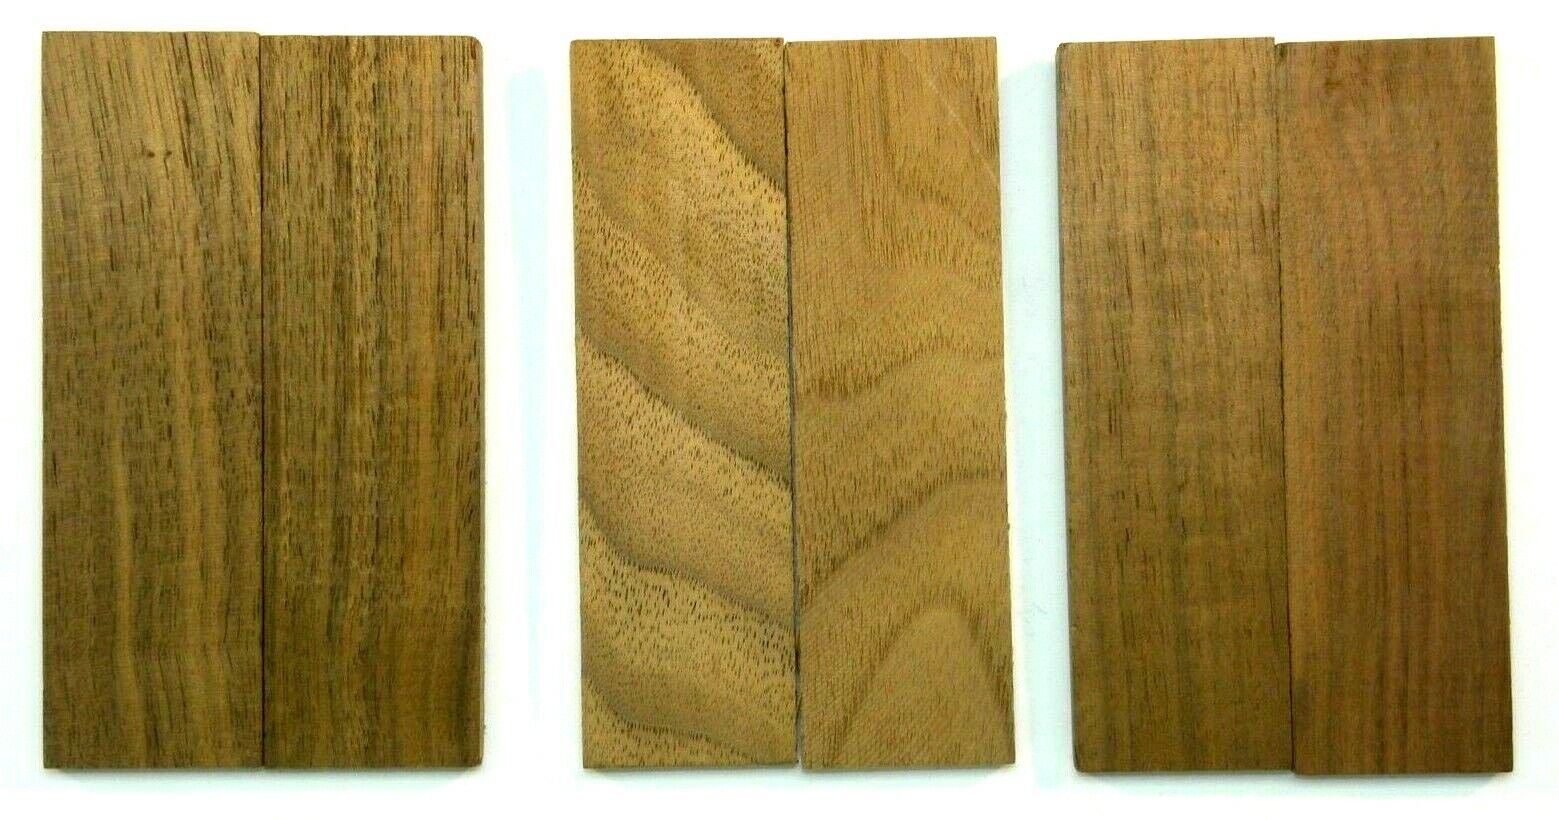 1 PAIR MATCHED 1-1/4 X 4-1/4" KNIFE HANDLE SCALES ROSEWOOD WOOD SLIGHT TAPER QC ROSEWOOD